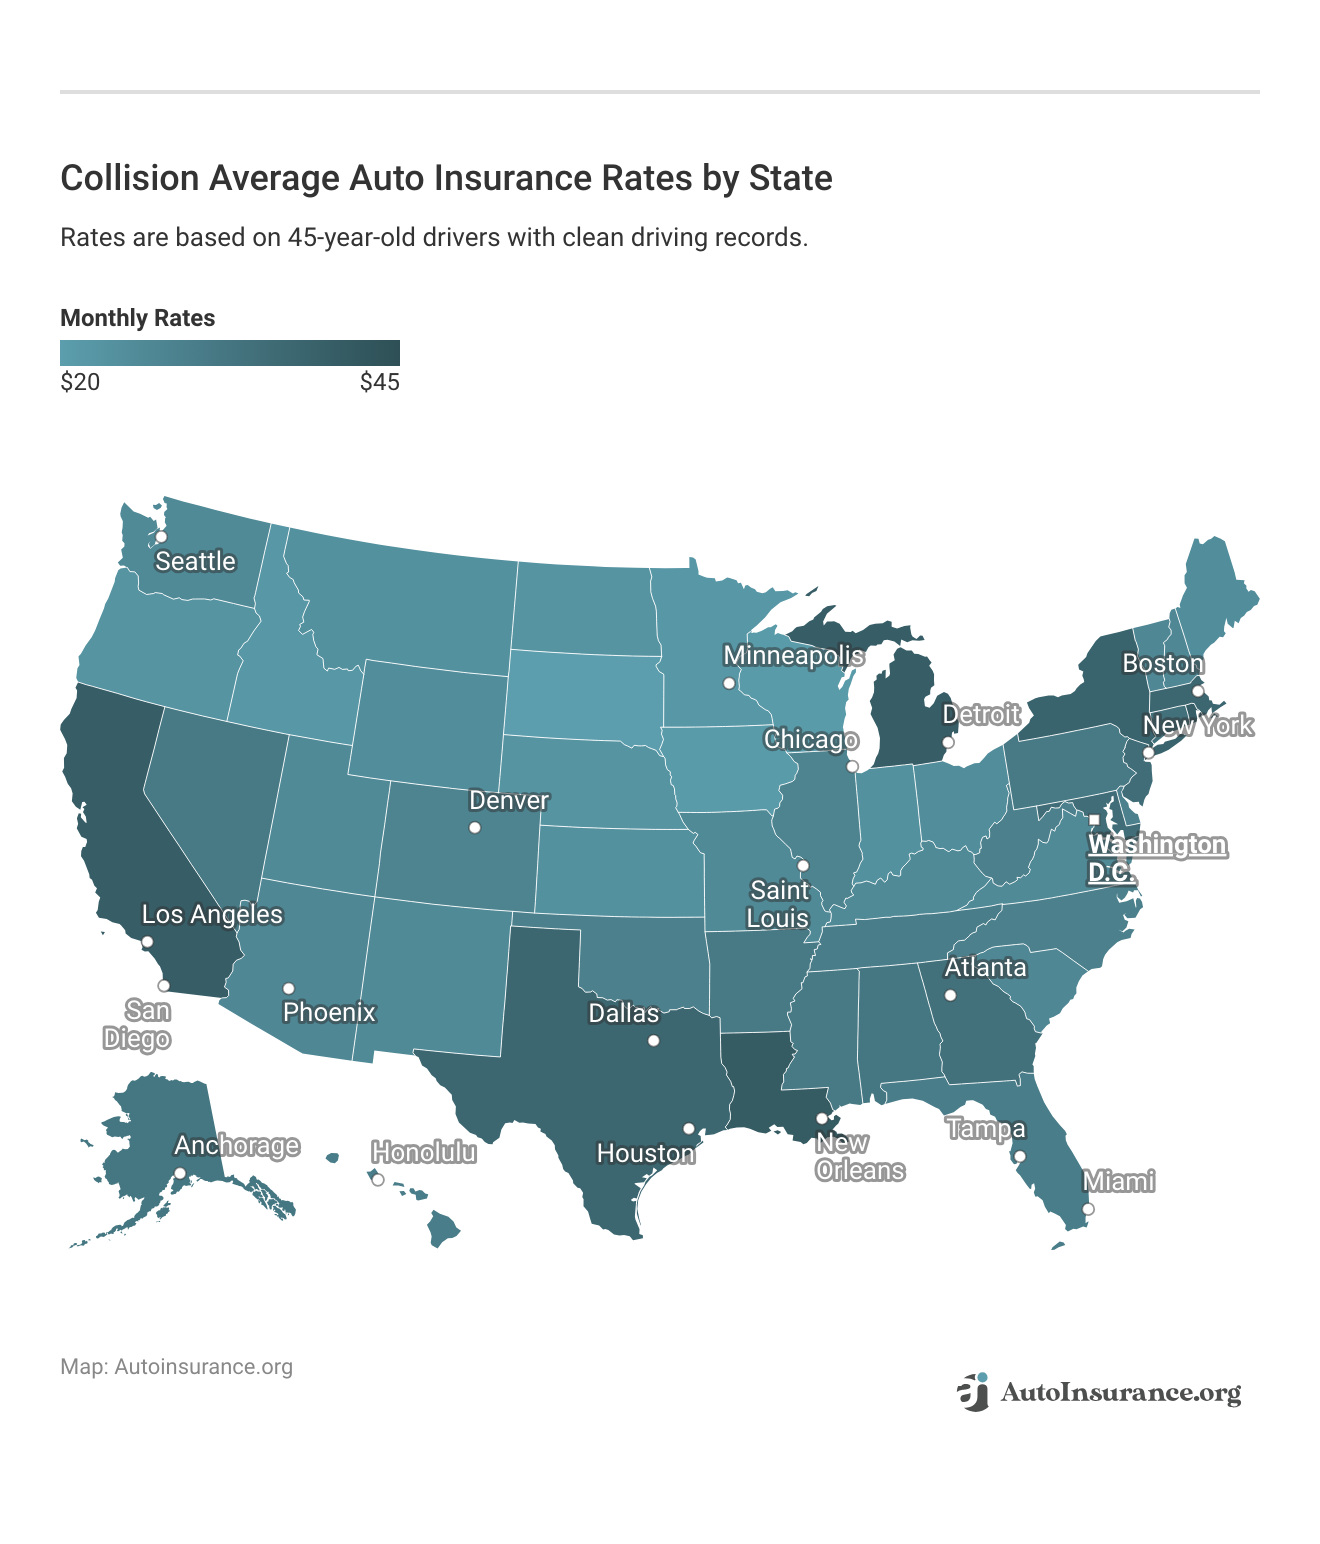 <h3>Collision Average Auto Insurance Rates by State</h3>